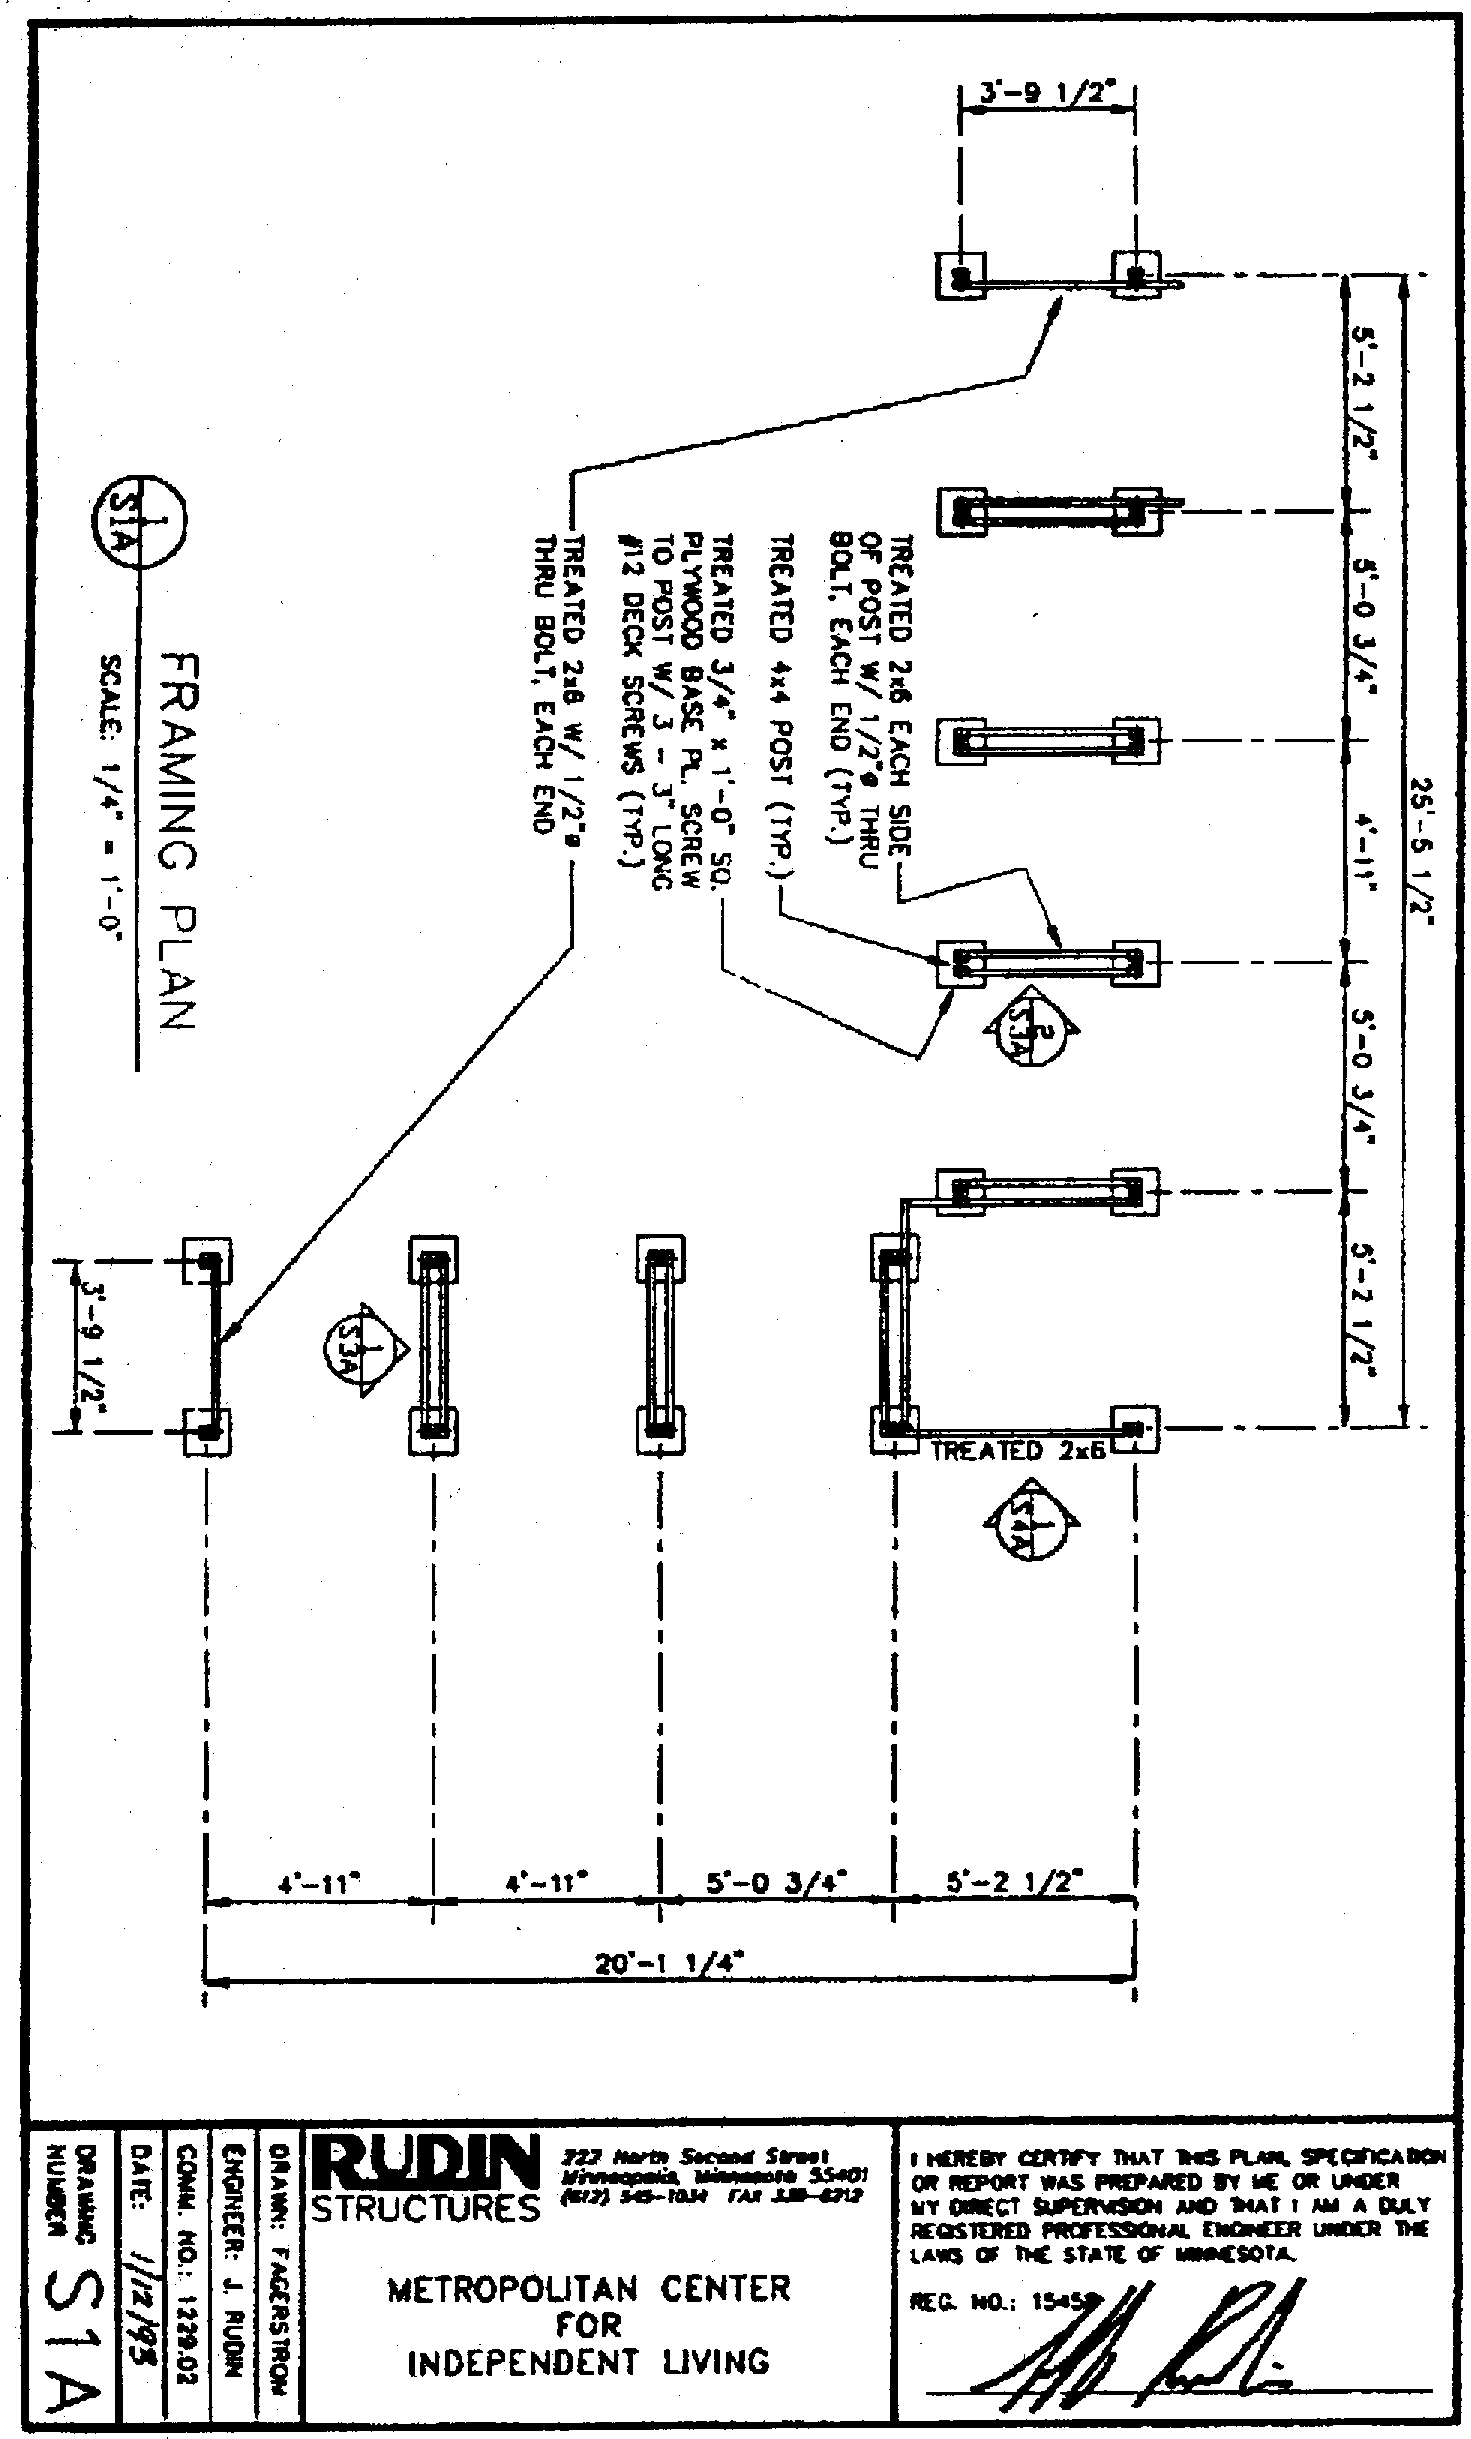 [engineering drawing of support framing plan]